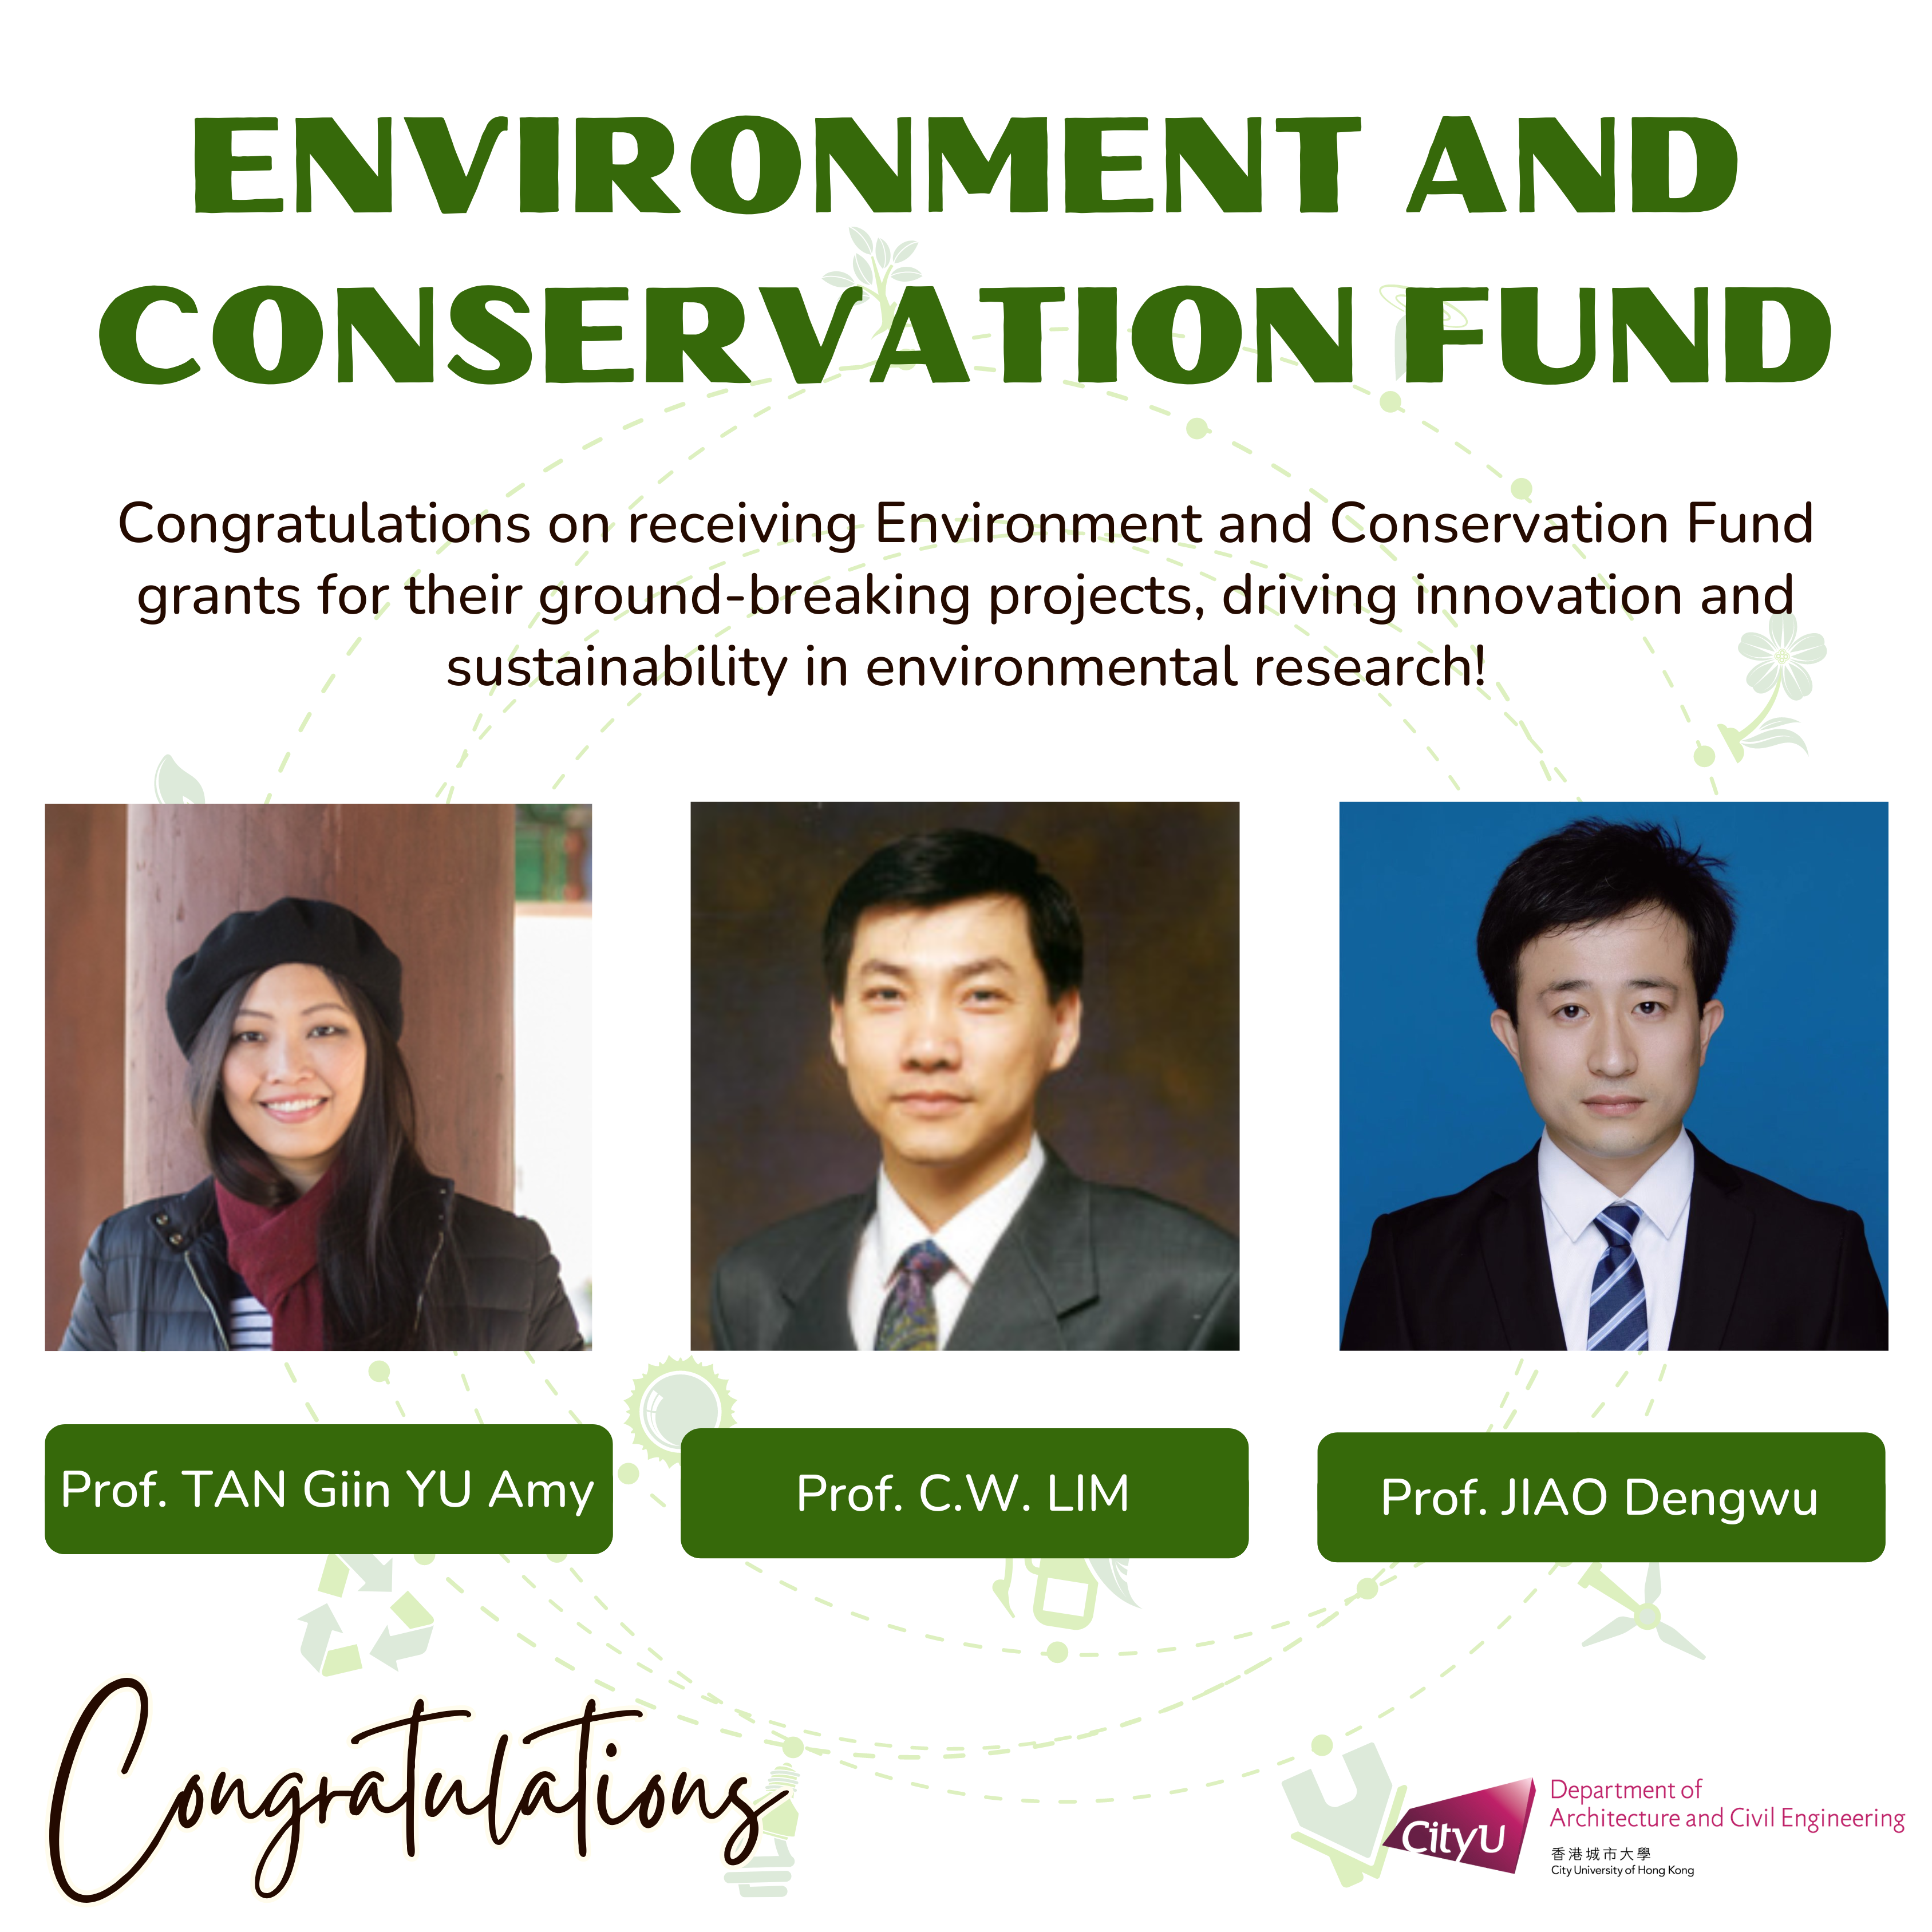 Congratulations to our esteemed professors on being granted the Environment and Conservation Fund for their ground-breaking projects! 🌱  🌍 Prof.  TAN Giin Yu Amy Project Title: Development of a Micro-aerated Anaerobic Digestion (MAAD) Process to Enhance Biogas Production and Sulfide Suppression [新型微曝氣厭氧消化 (MAAD) 技術增強含鹽污泥的沼氣產量並抑制硫化物排放] Funding Amount: HK$700,000  🌍 Prof. C.W. LIM  Project Title: Development of Sustainable Green Structural Concrete via Effective Utilization of Waste Glass and Basalt Fiber 